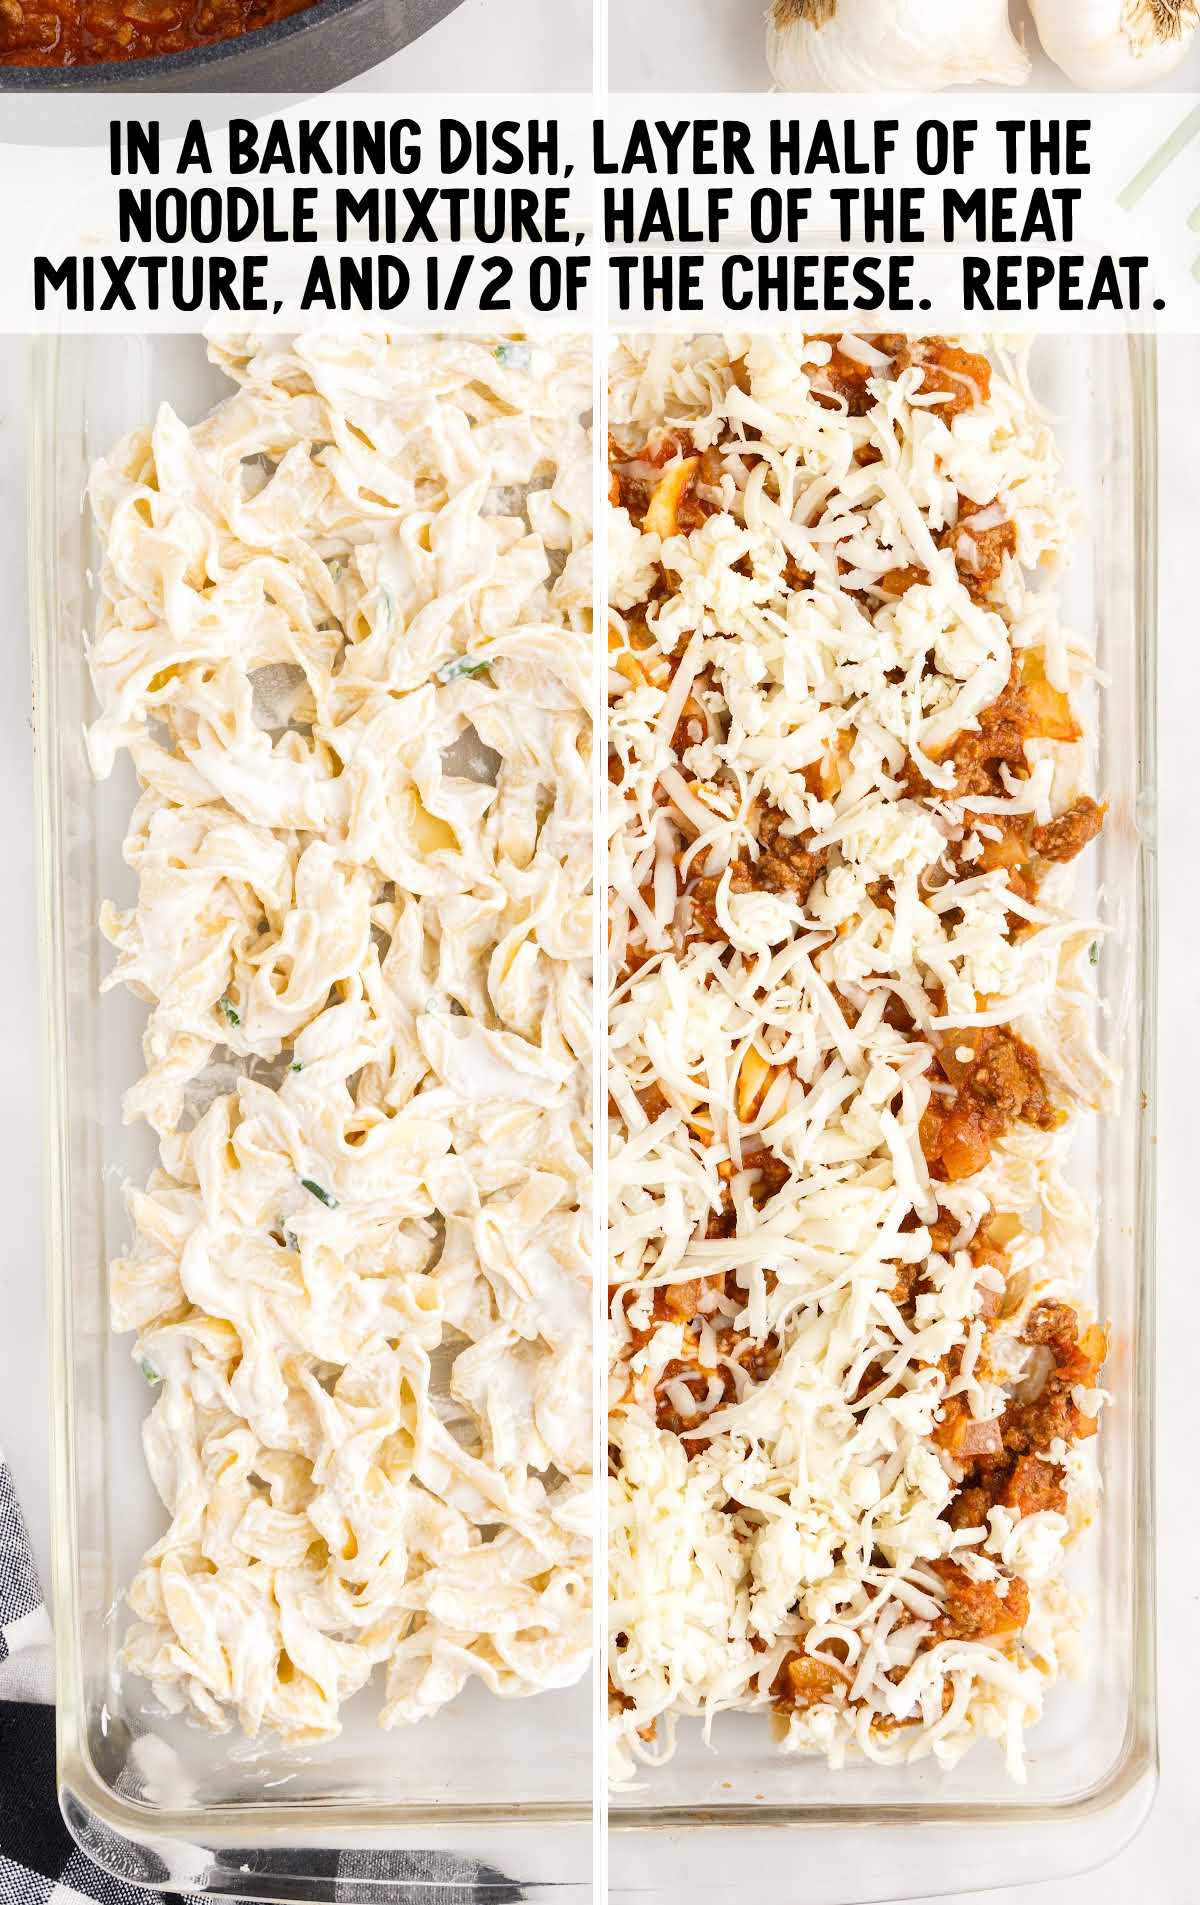 noodle mixture, meat, and cheese layered in a baking dish